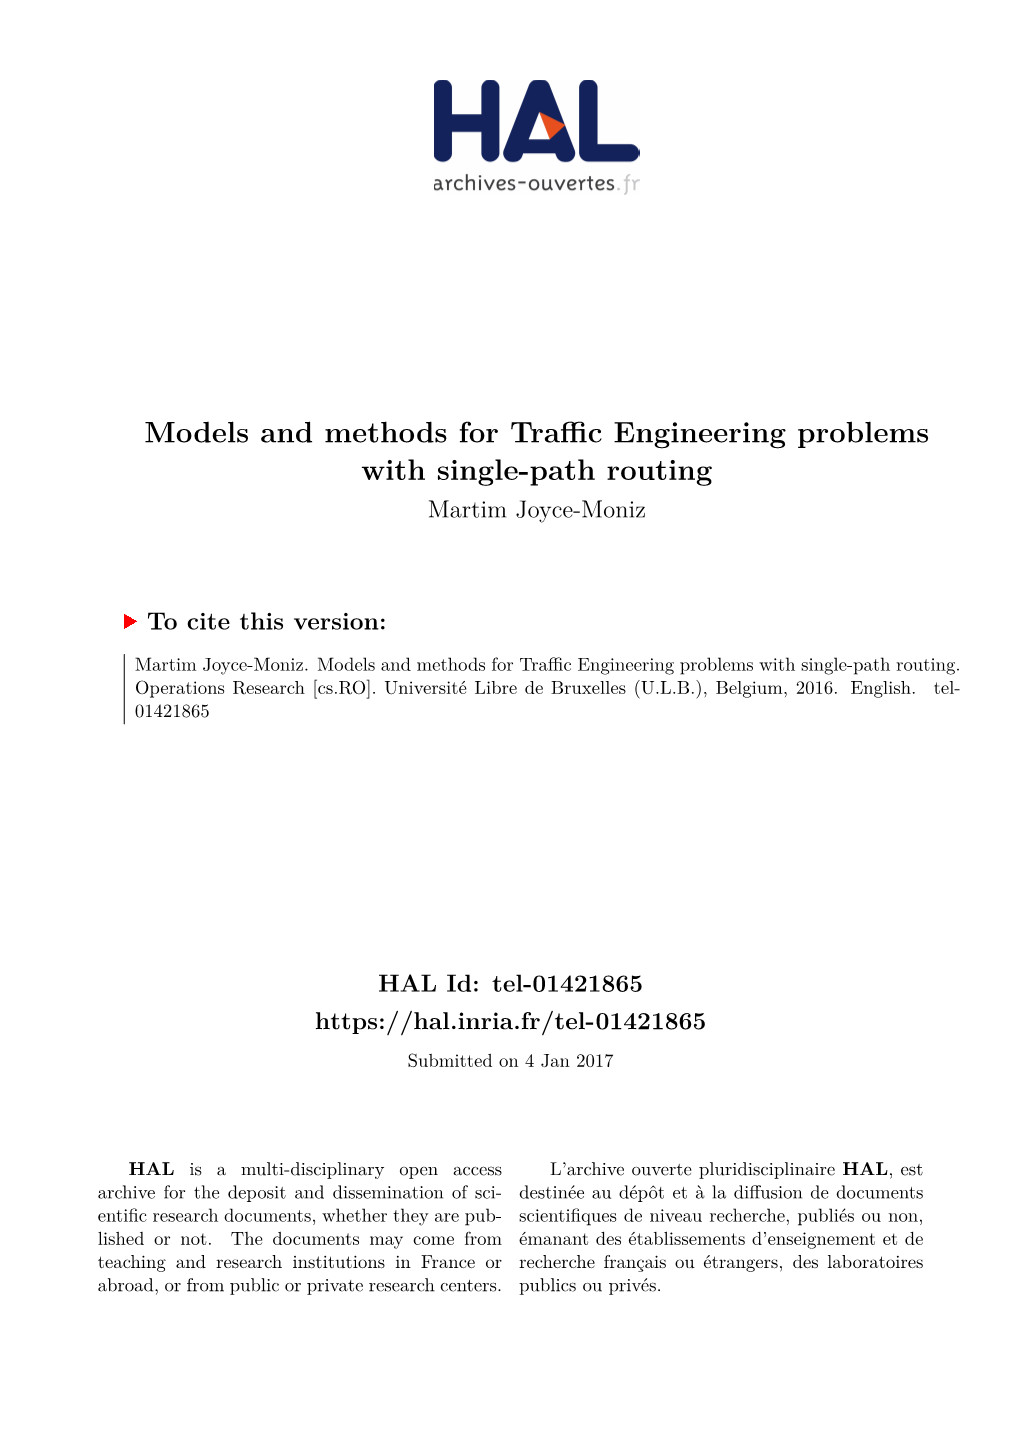 Models and Methods for Traffic Engineering Problems with Single